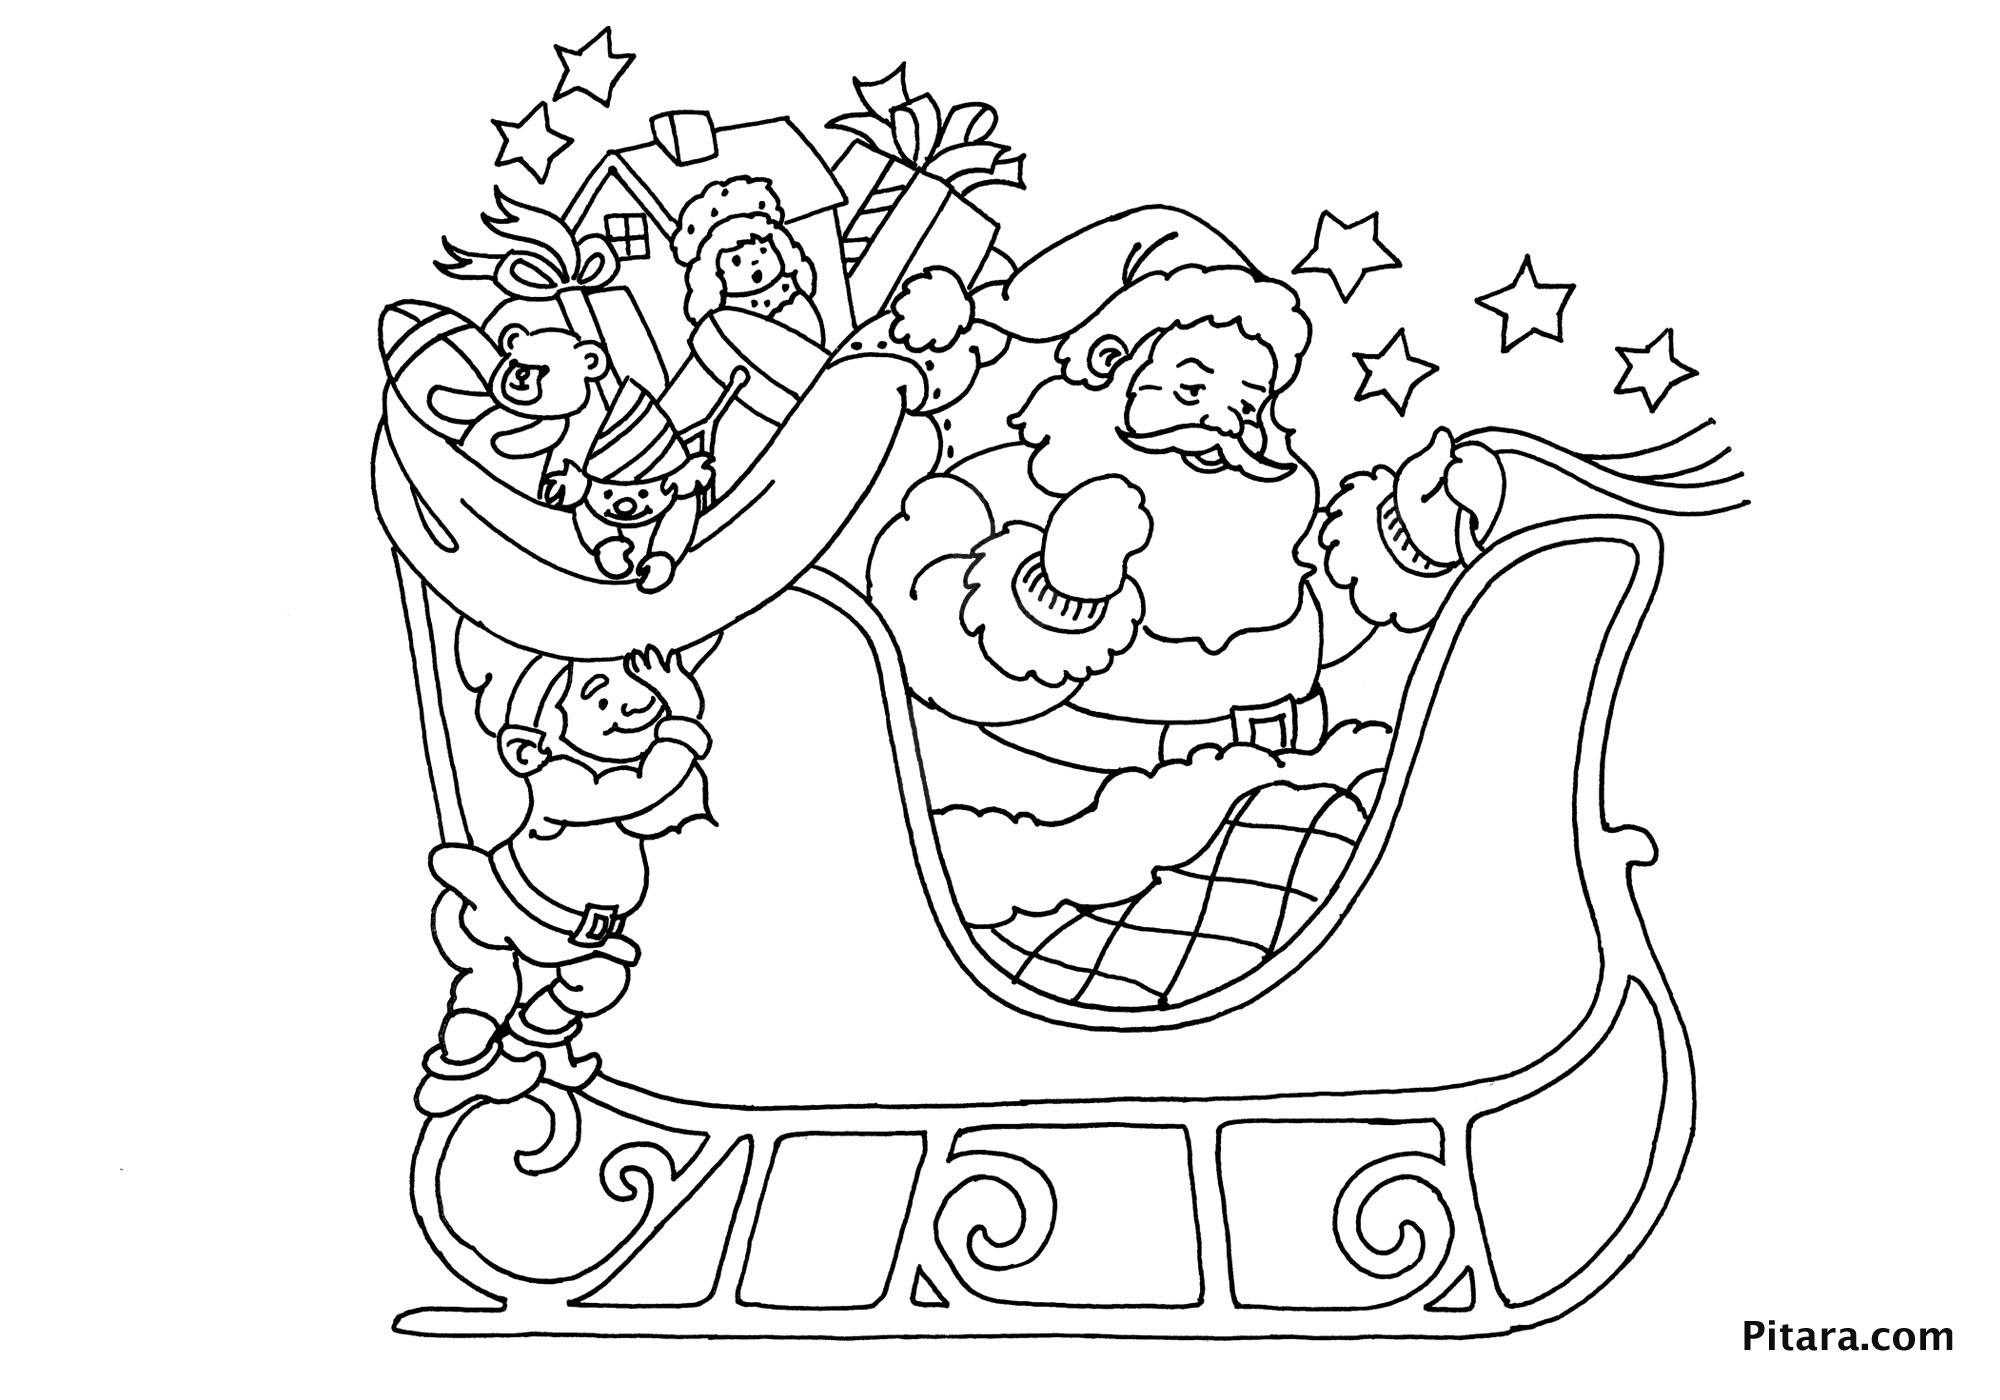 Christmas Coloring Pages for Kids  Pitara Kids Network